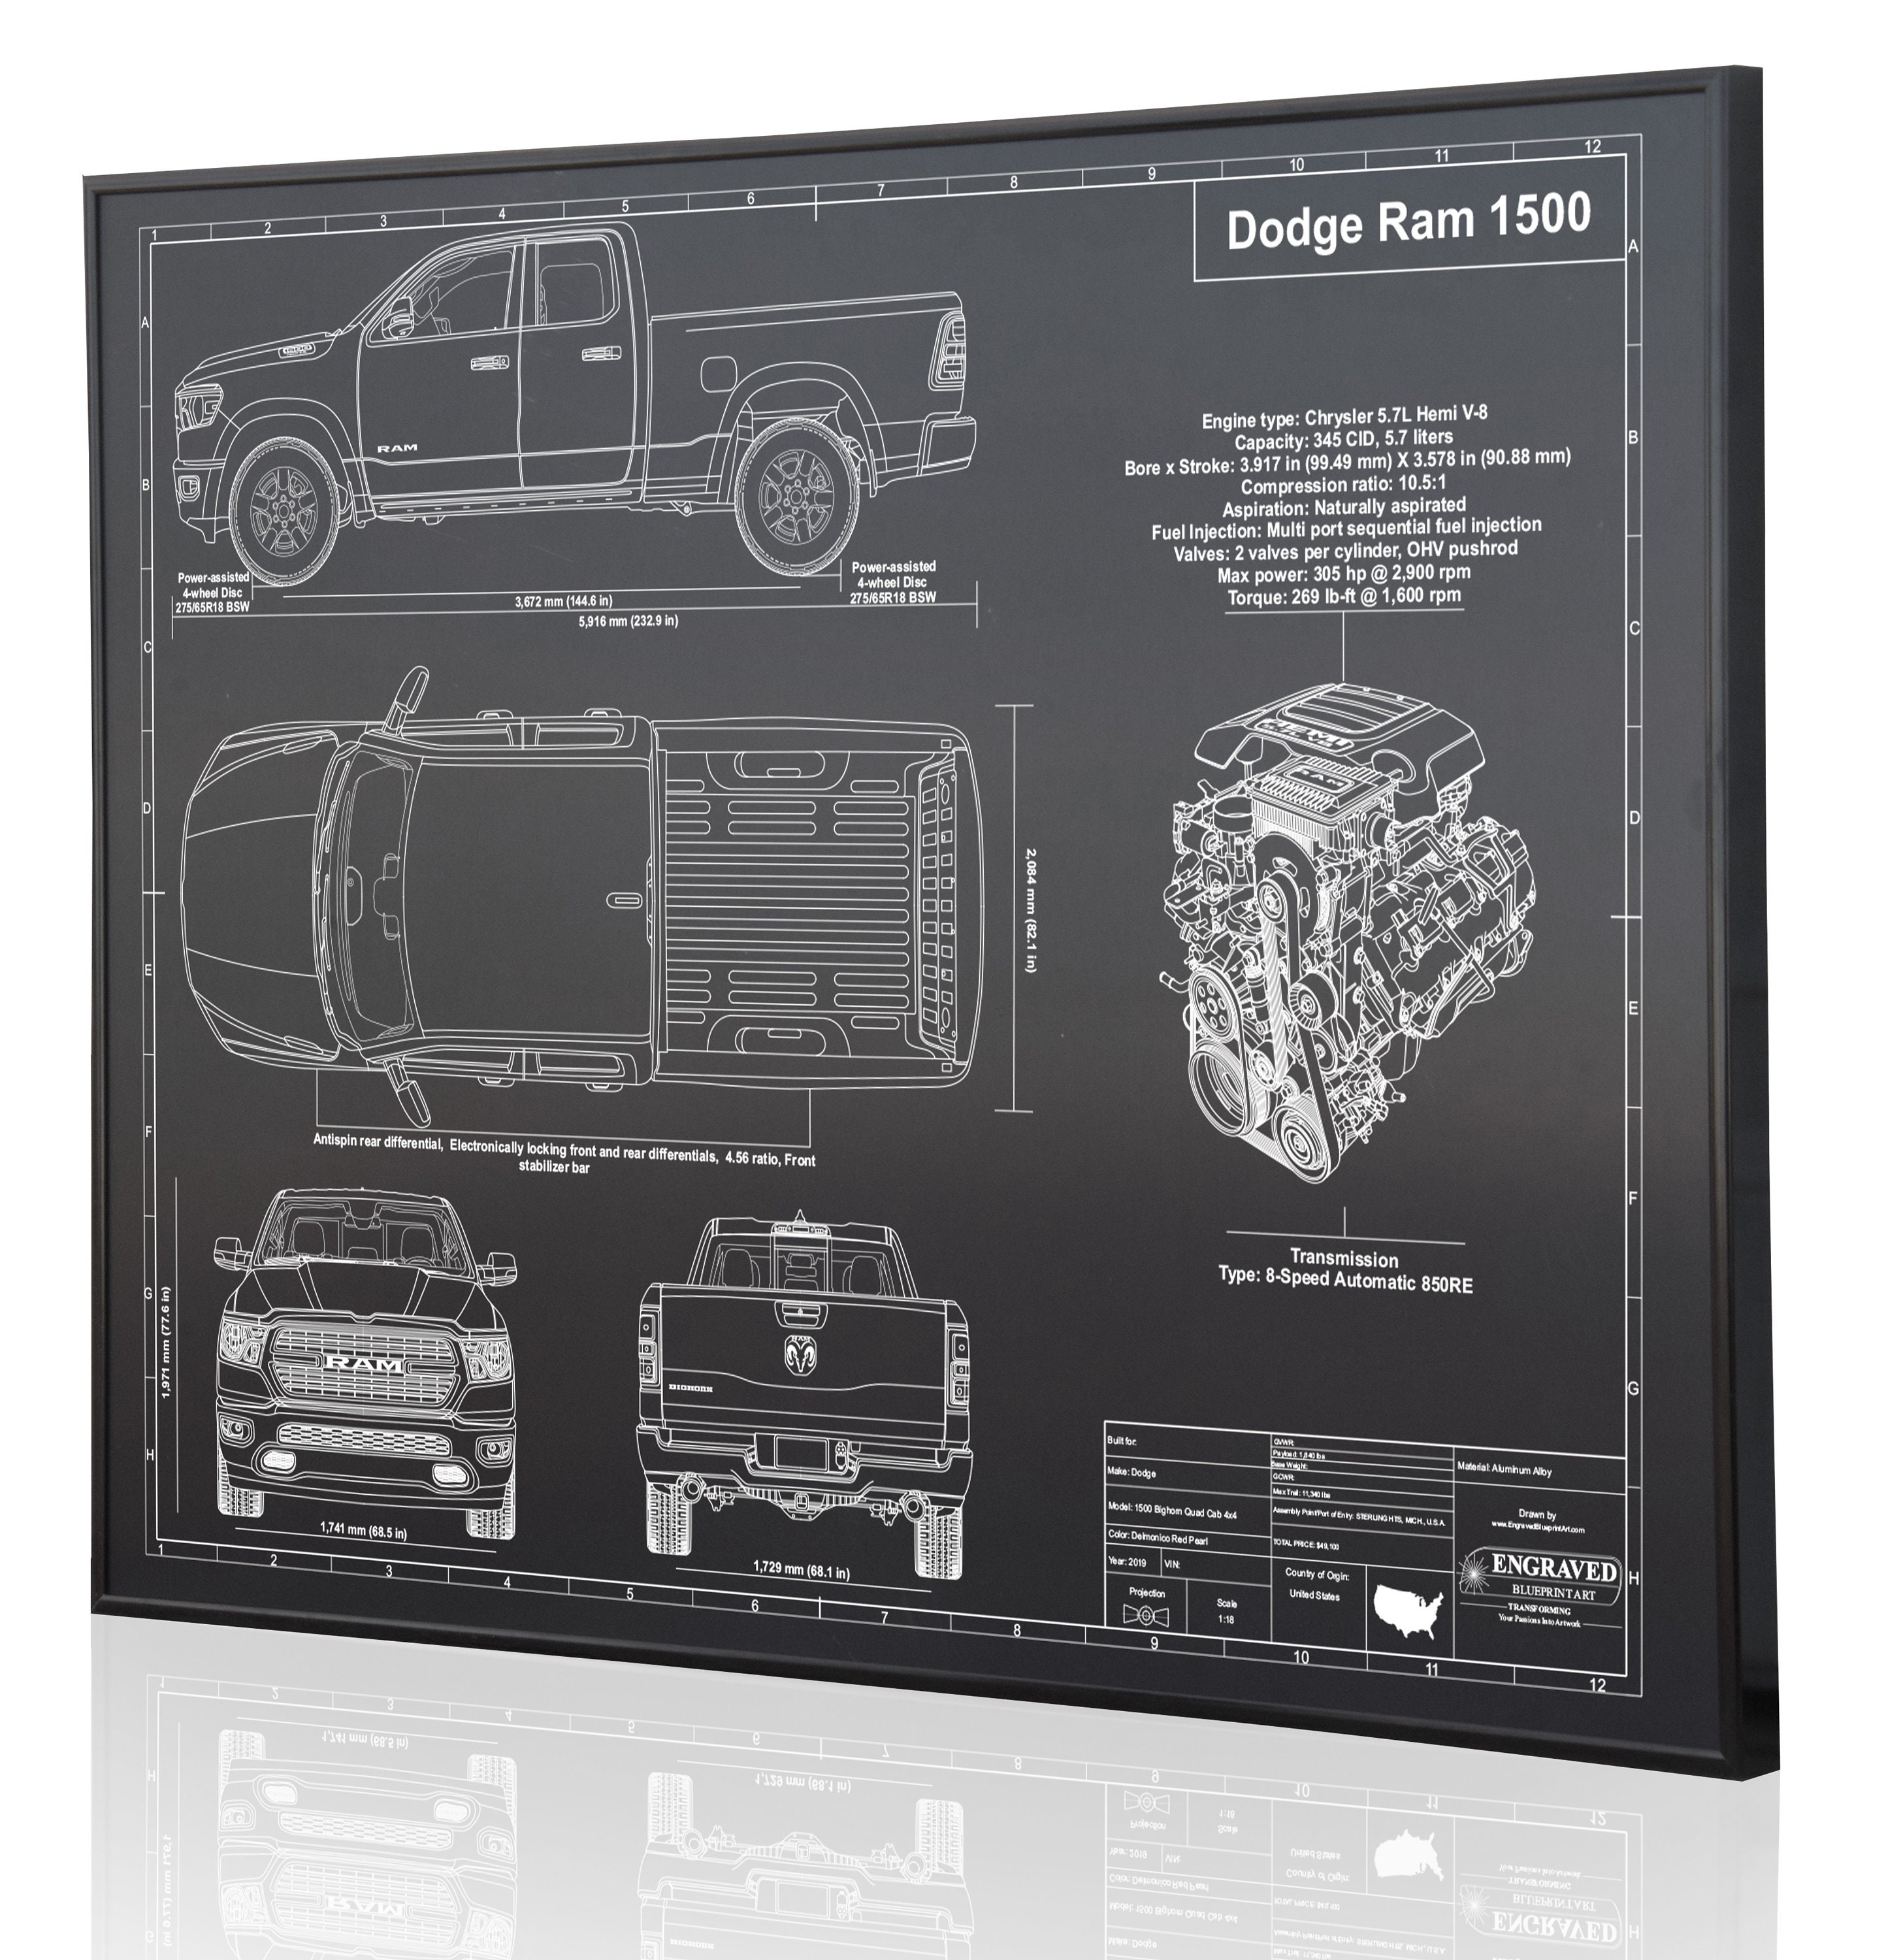 Dodge Ram 1500 Pickup Truck Laser Engraved Wall Art Poster. On Metal, Acrylic Or Wood. Custom Car Art, Sign. Great Gift